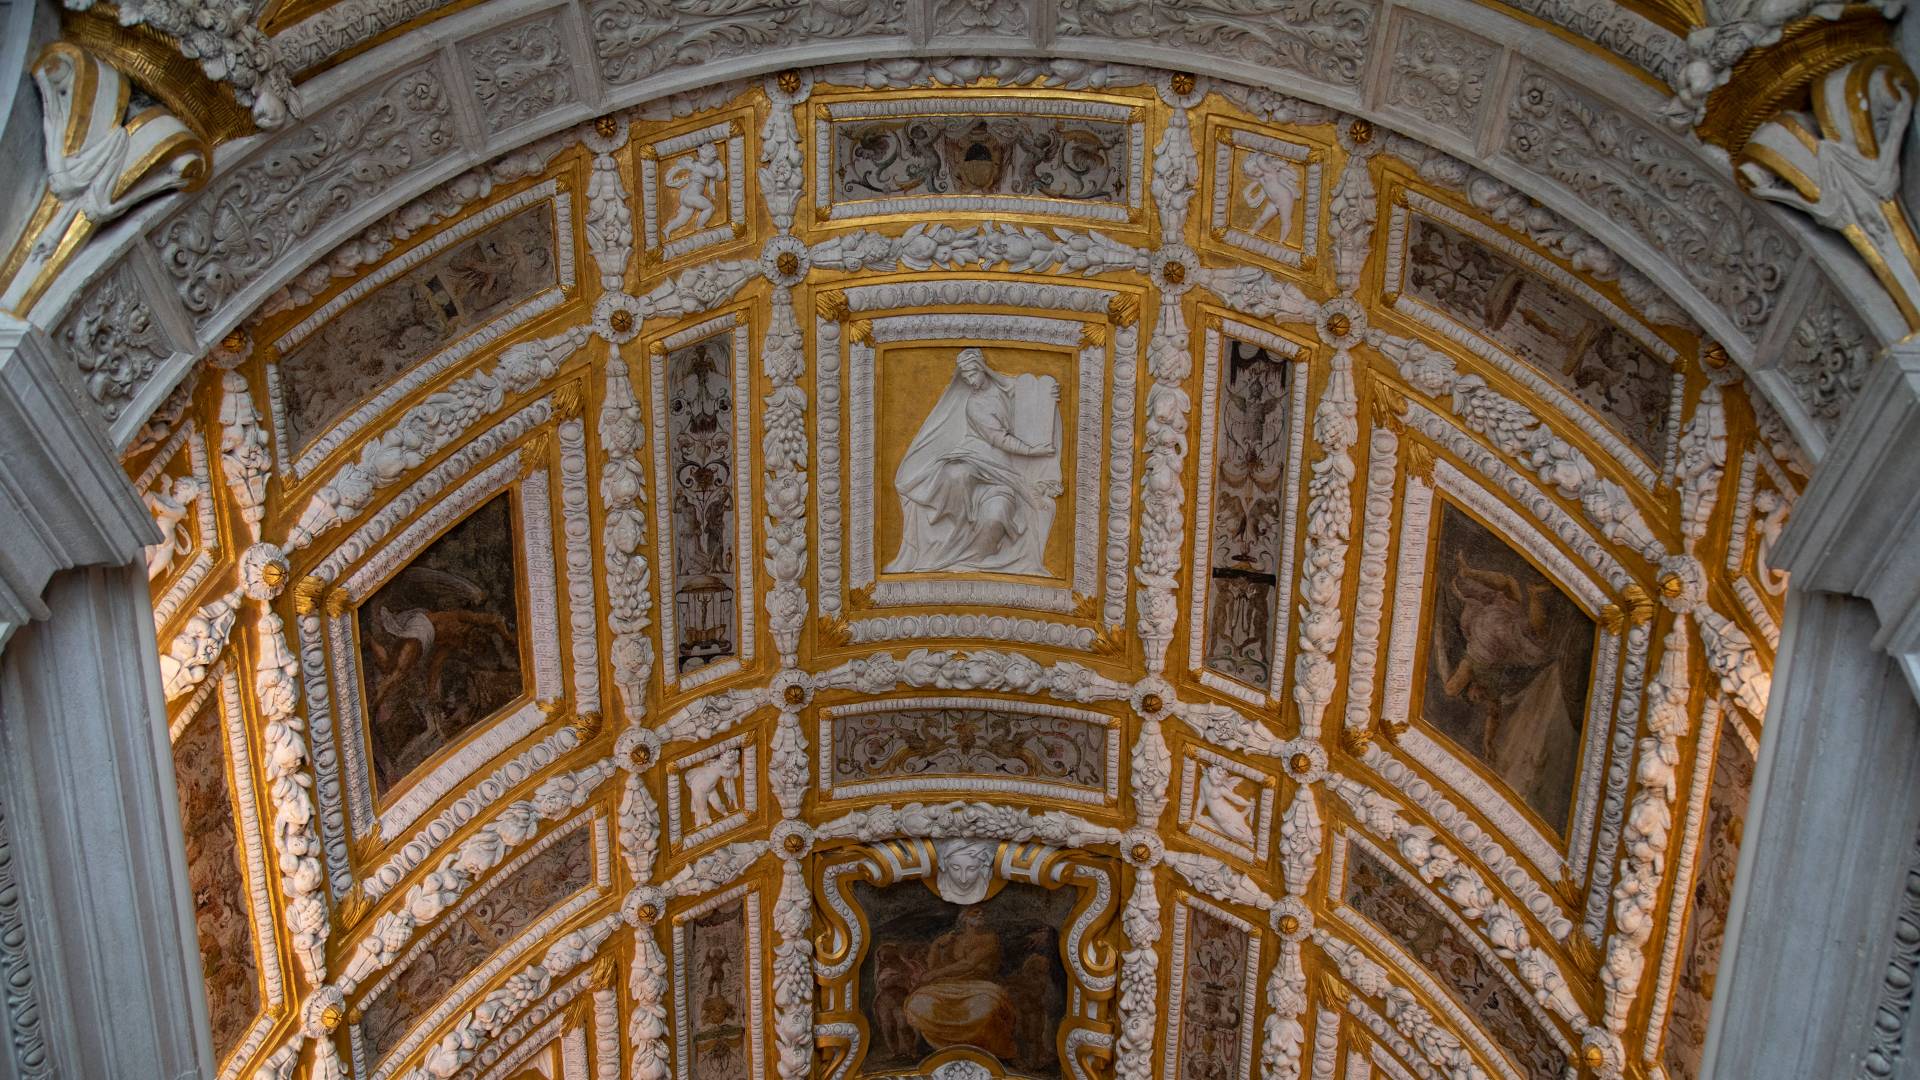 Detail of ceiling in the Doge's Palace in Venice